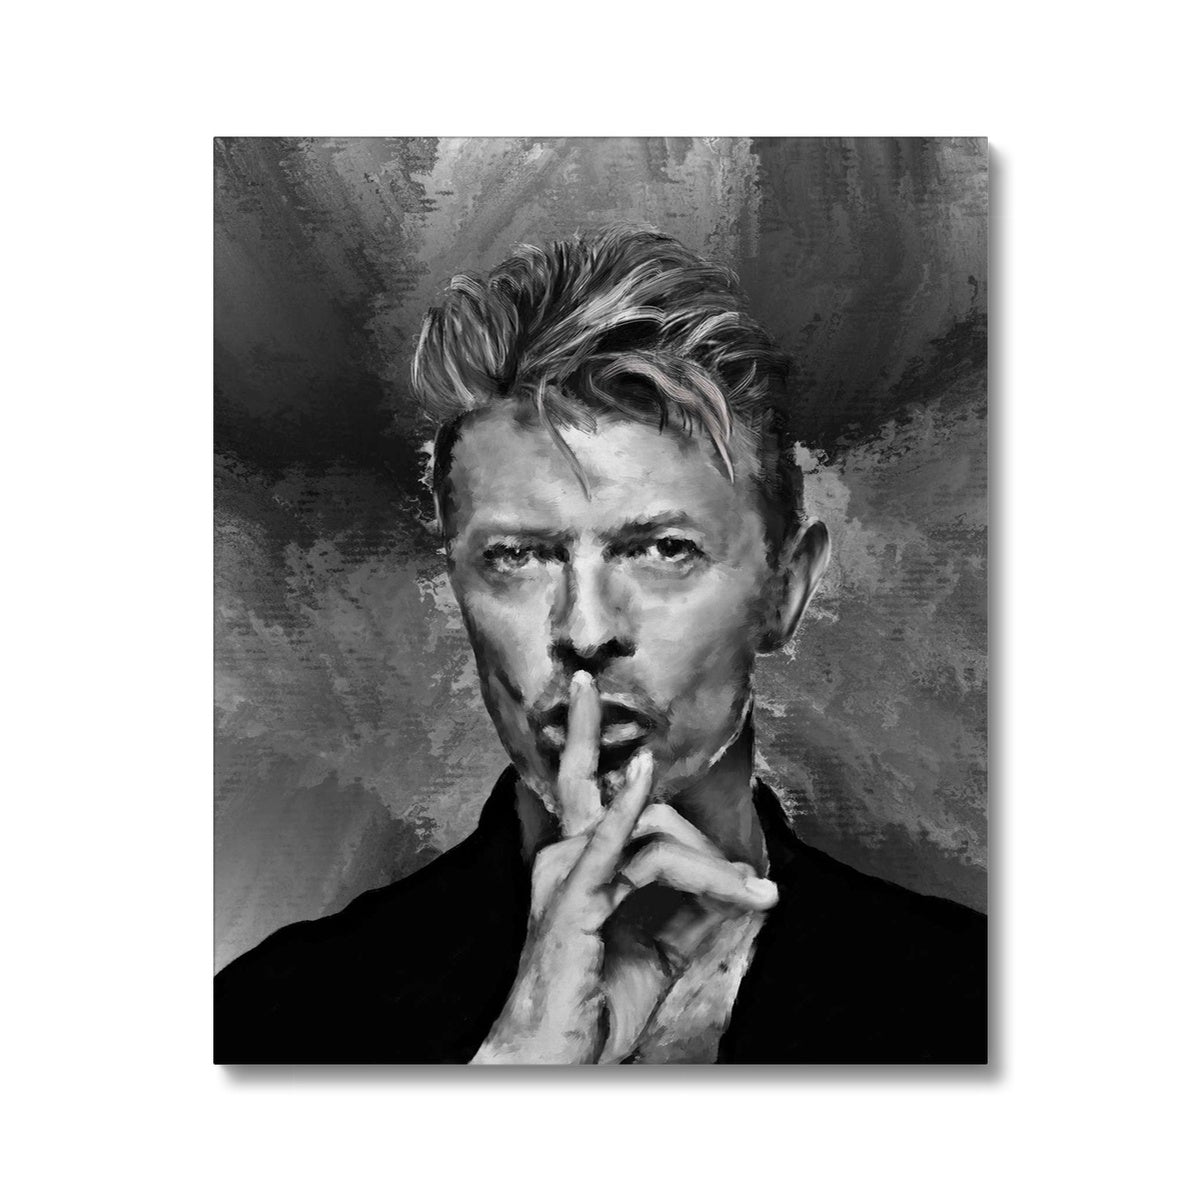 Bowie 'Shhh!' Painting Canvas